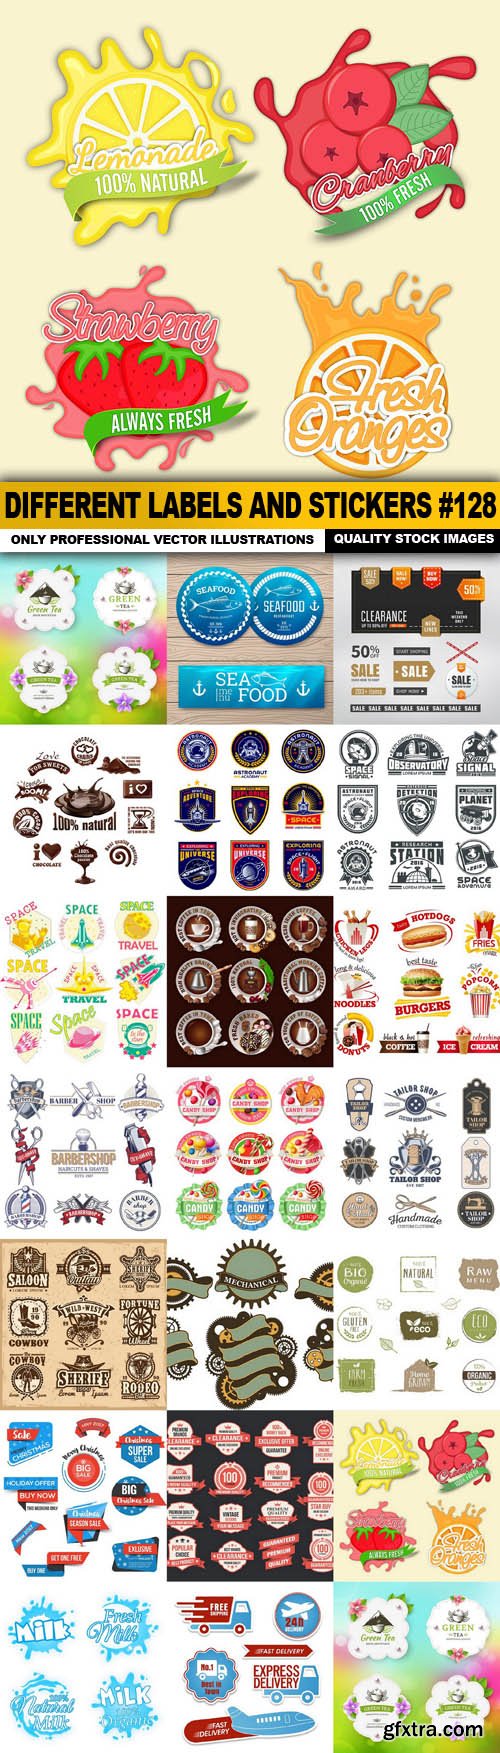 Different Labels And Stickers #128 - 20 Vector